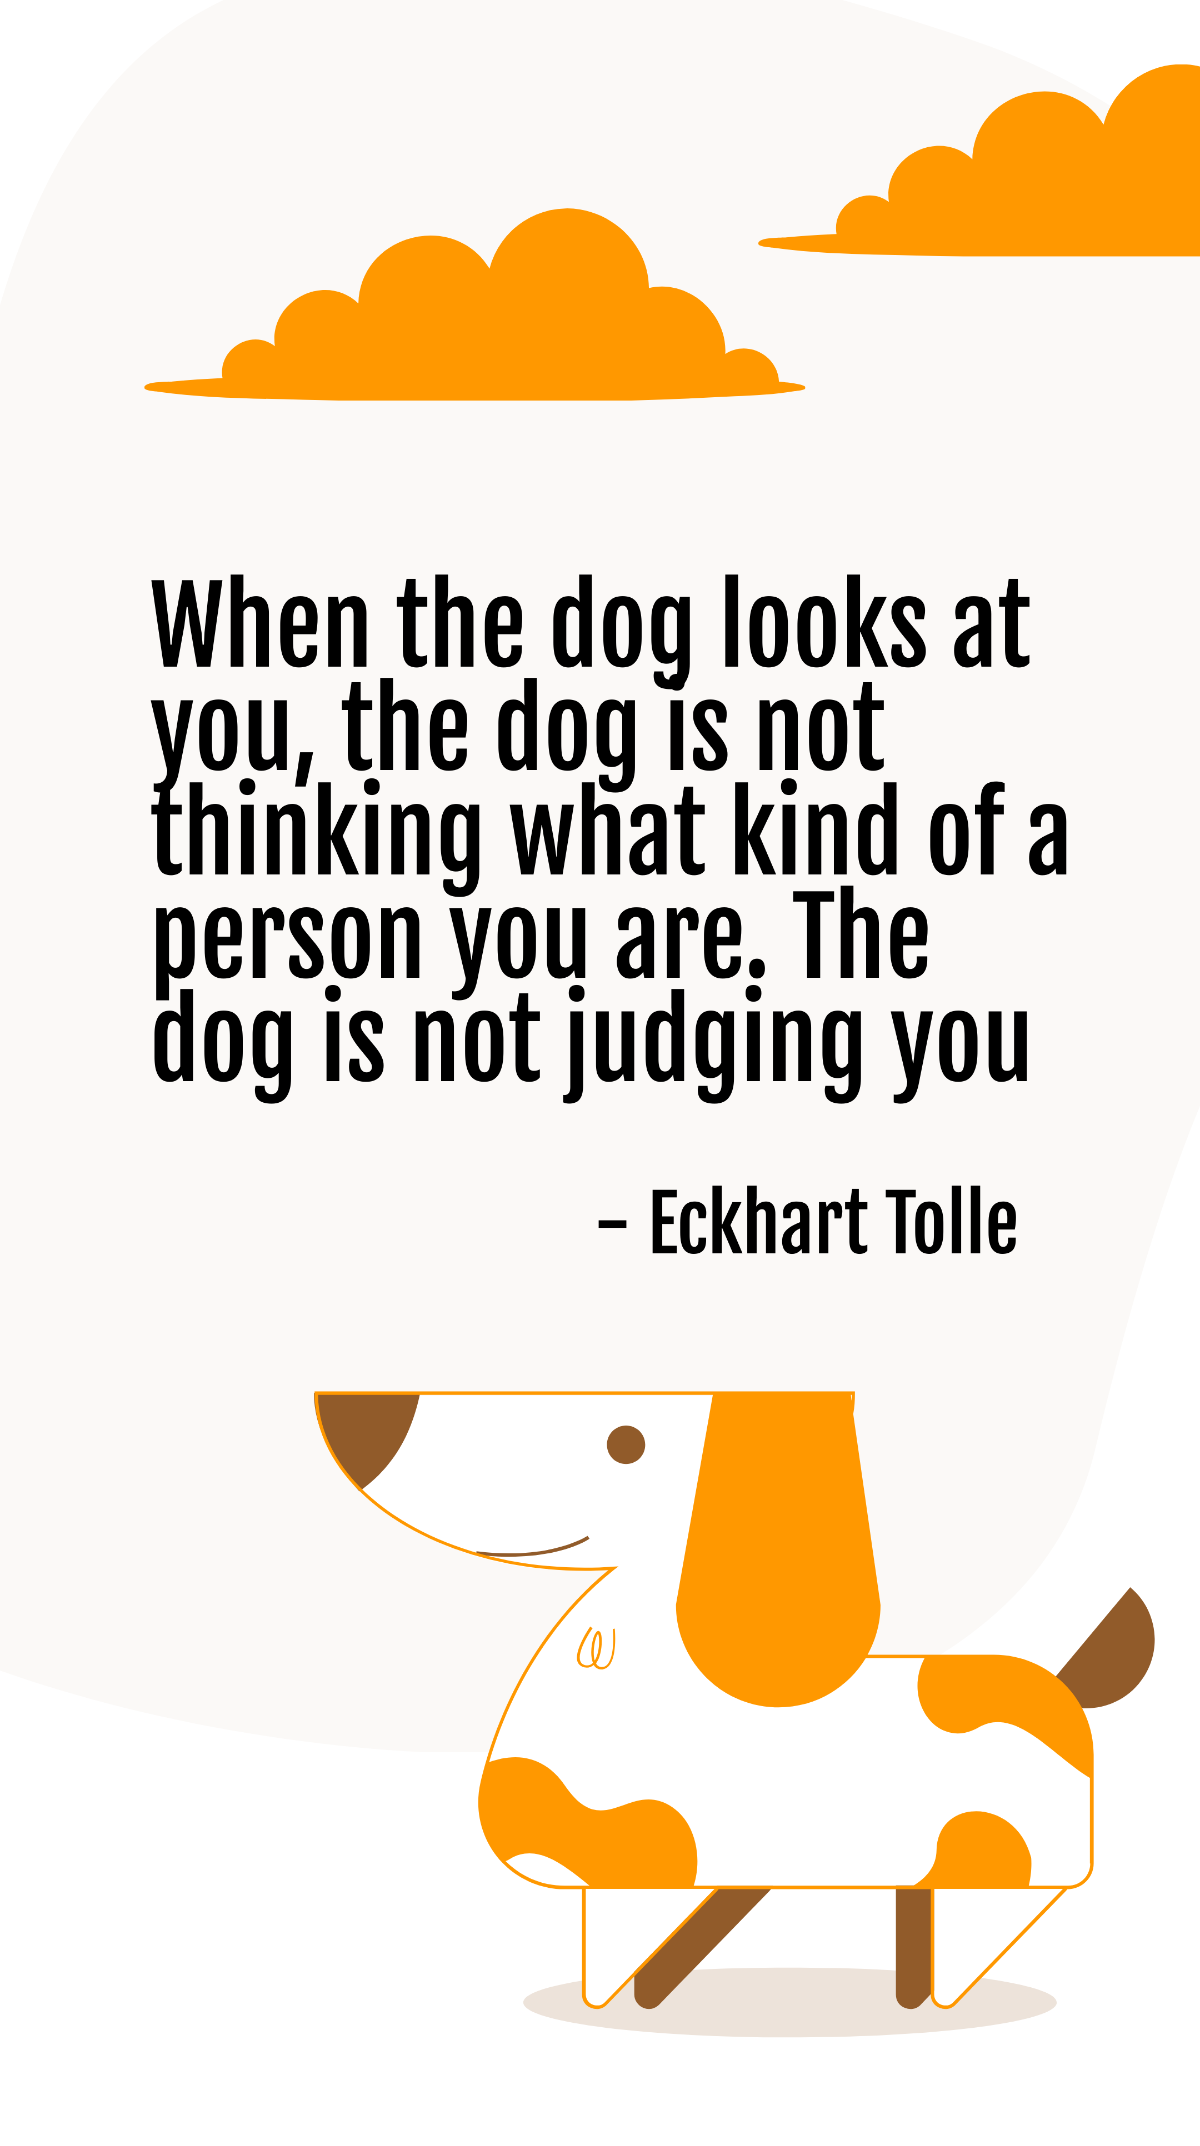 Free Eckhart Tolle - When the dog looks at you, the dog is not thinking what kind of a person you are. The dog is not judging you Template